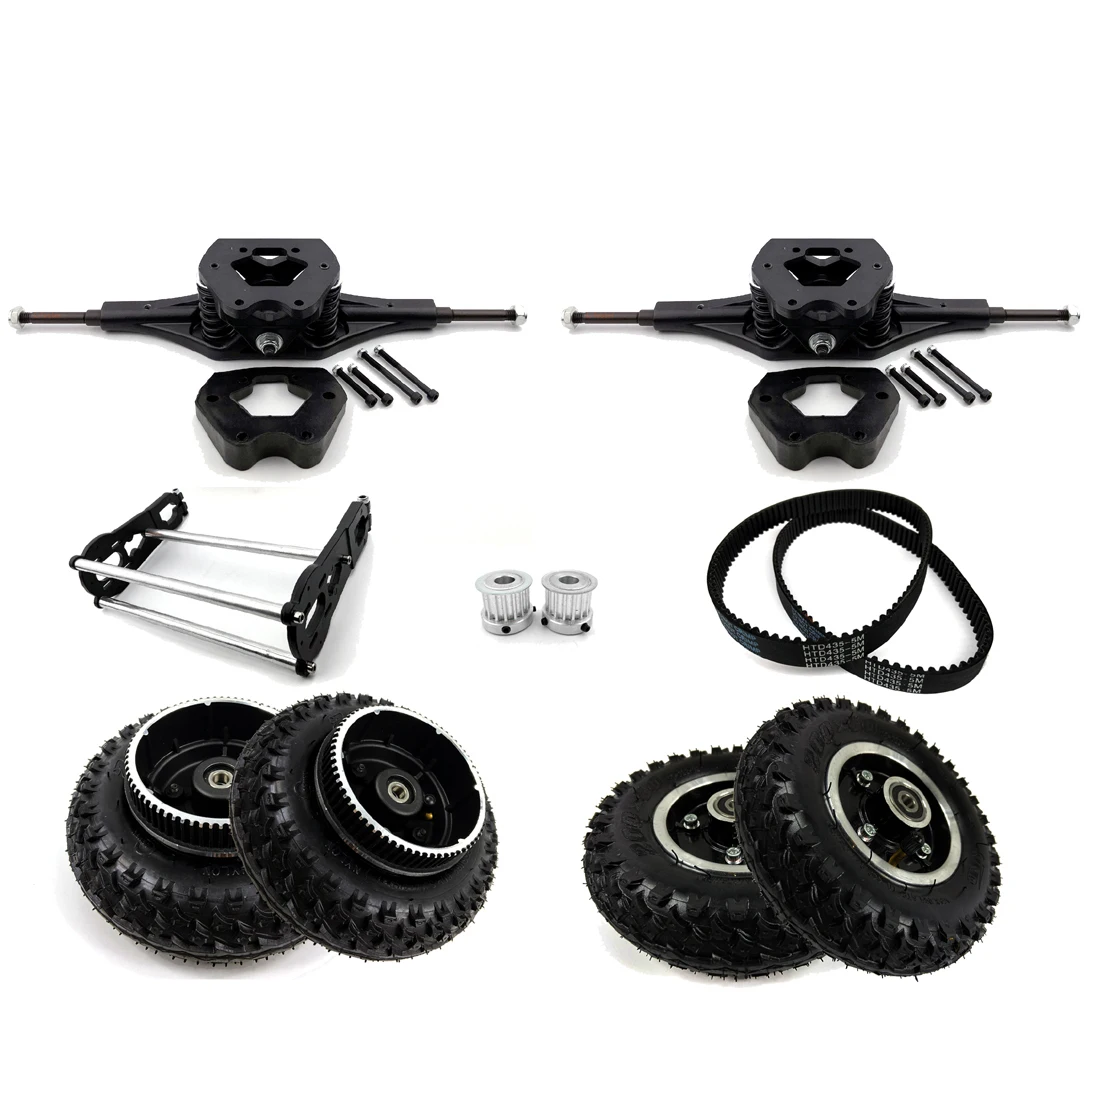 

Electric Mountain Skateboard Components With Trucks And Pulleys 8 Inch Inflated Wheels Motor Mounting Plates For 6374